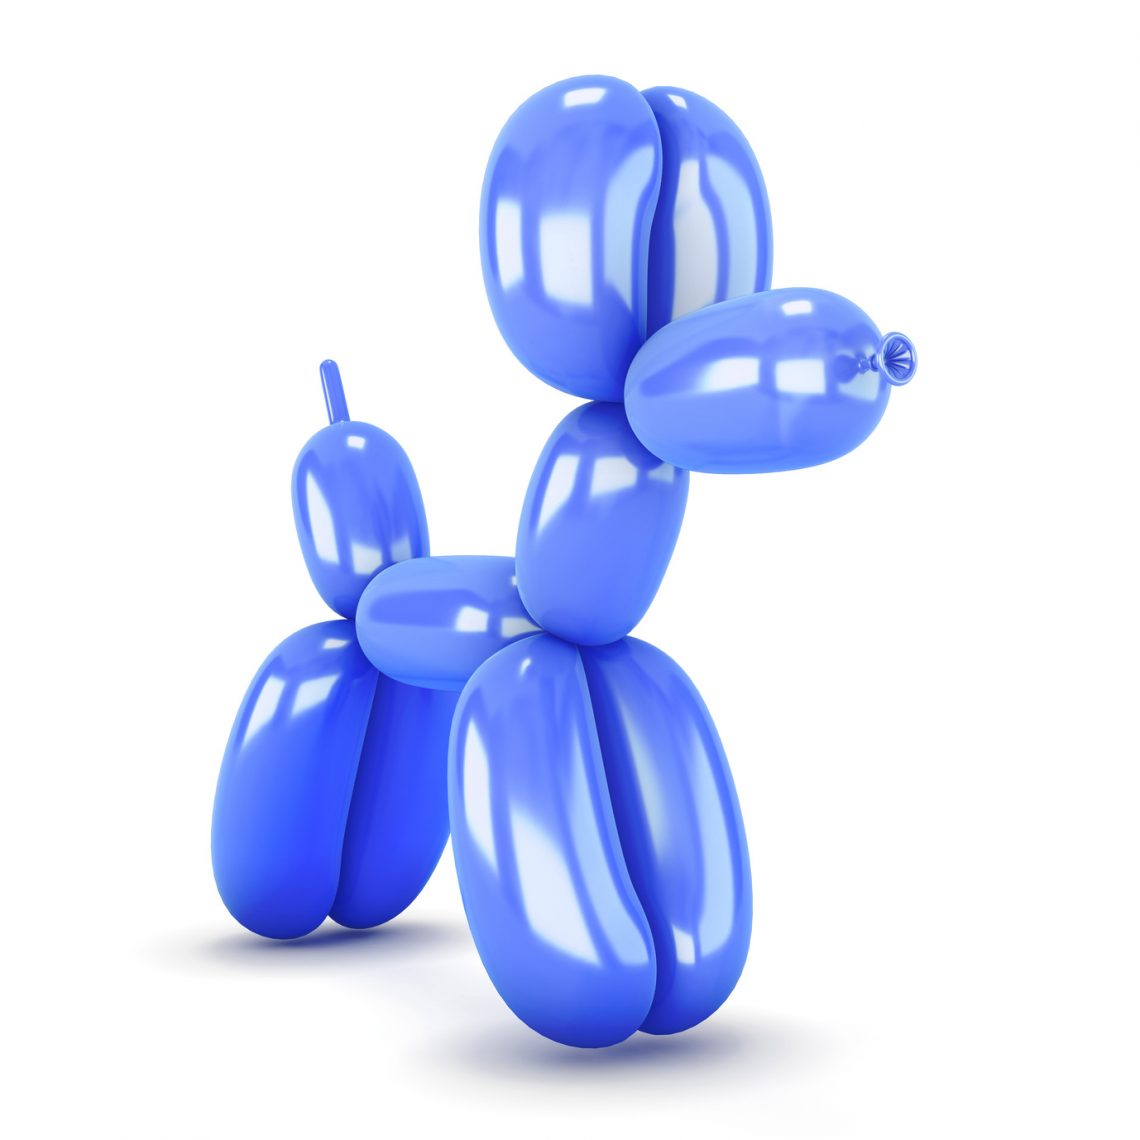 Blue dog balloon on a white background. 3d render image.